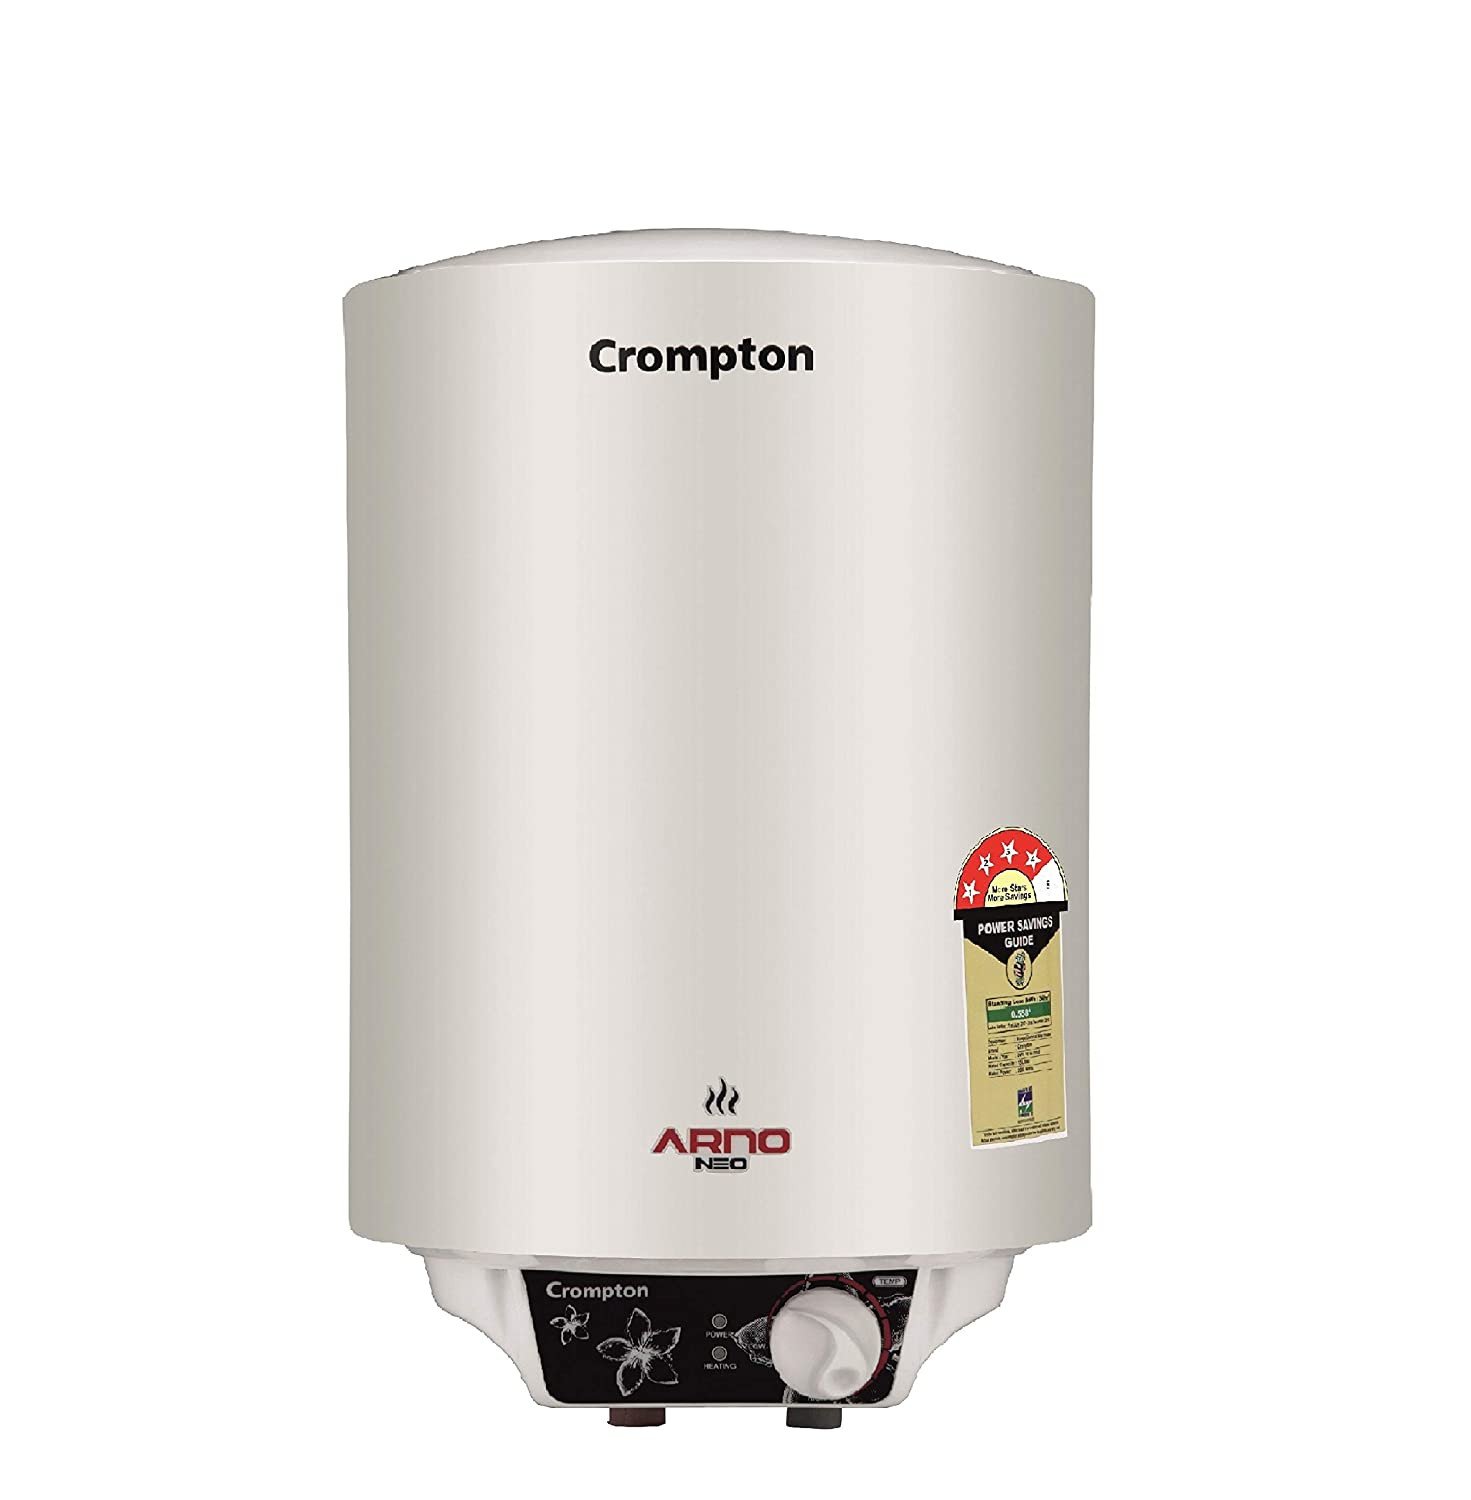 Crompton Arno Neo  10-Litre, 4 Star-Rated Storage Water Heater/Geyser-Trade Nepal